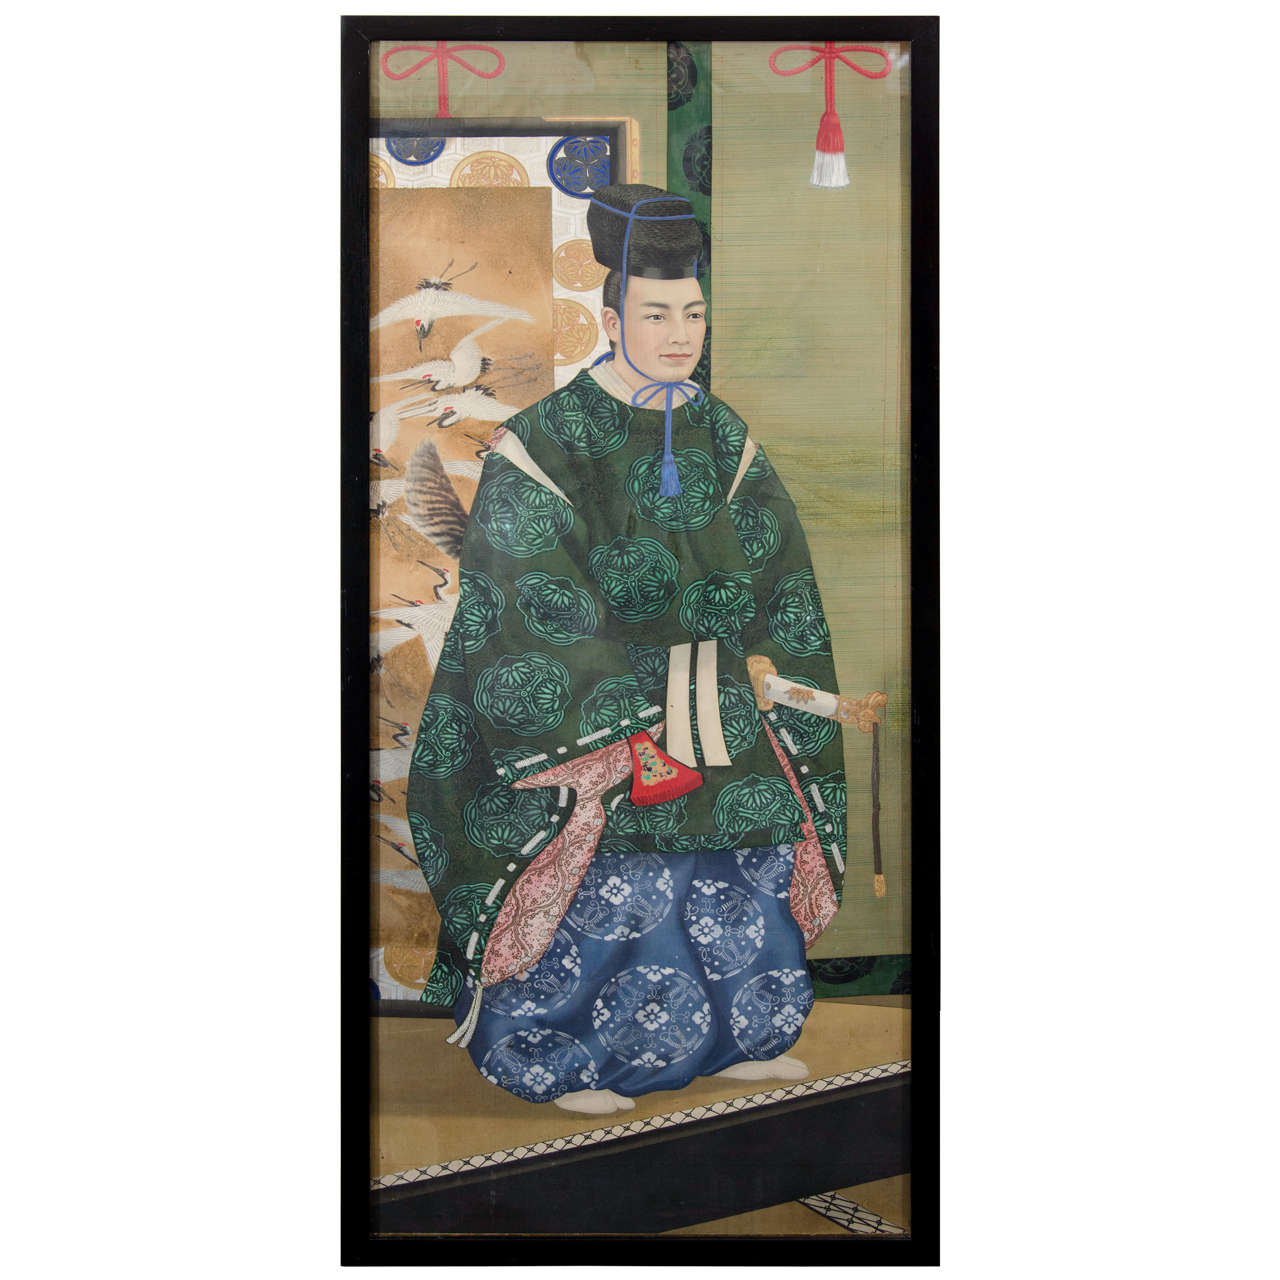 Japanese Imperial Portrait Painting of Man in Green Robes